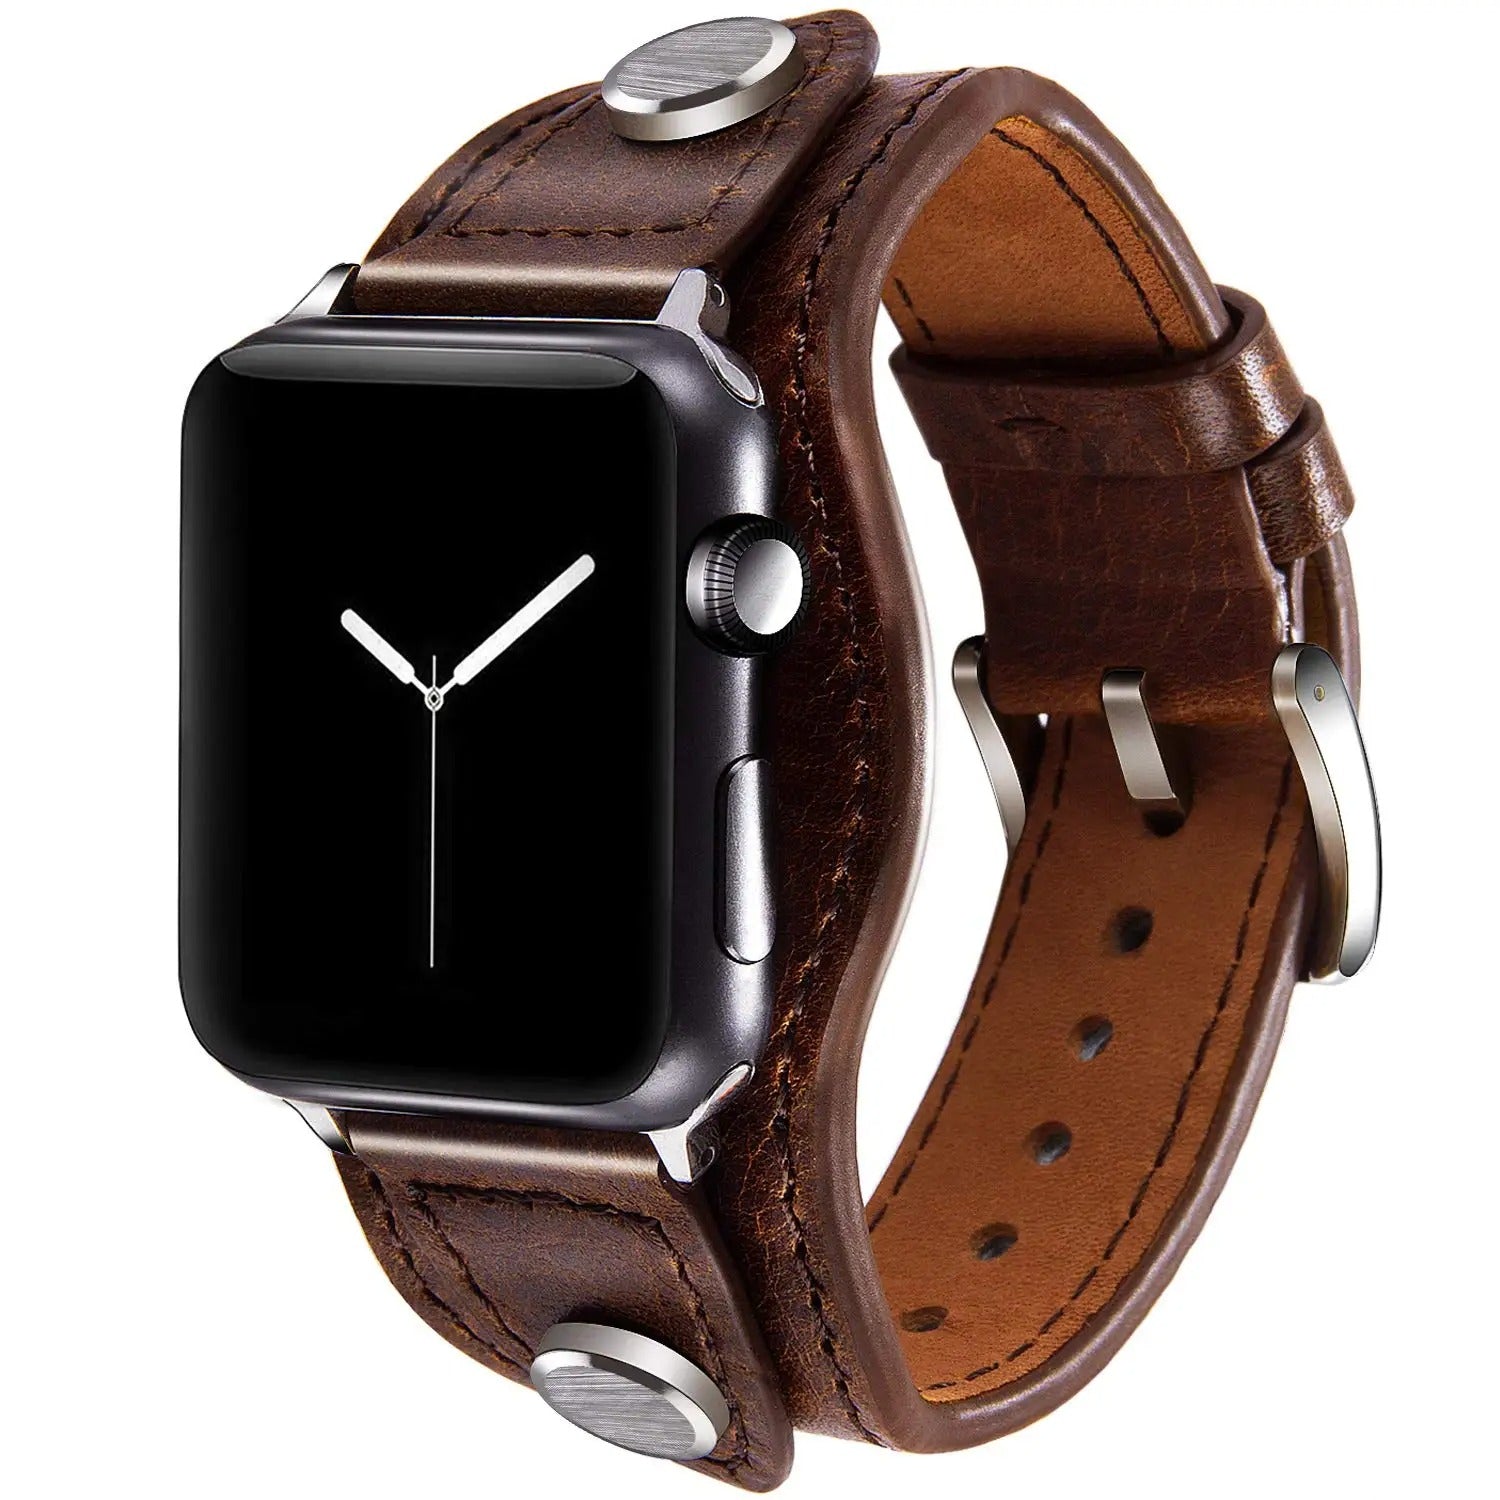 Wide Leather Apple Watch Band with Apple Watch installied